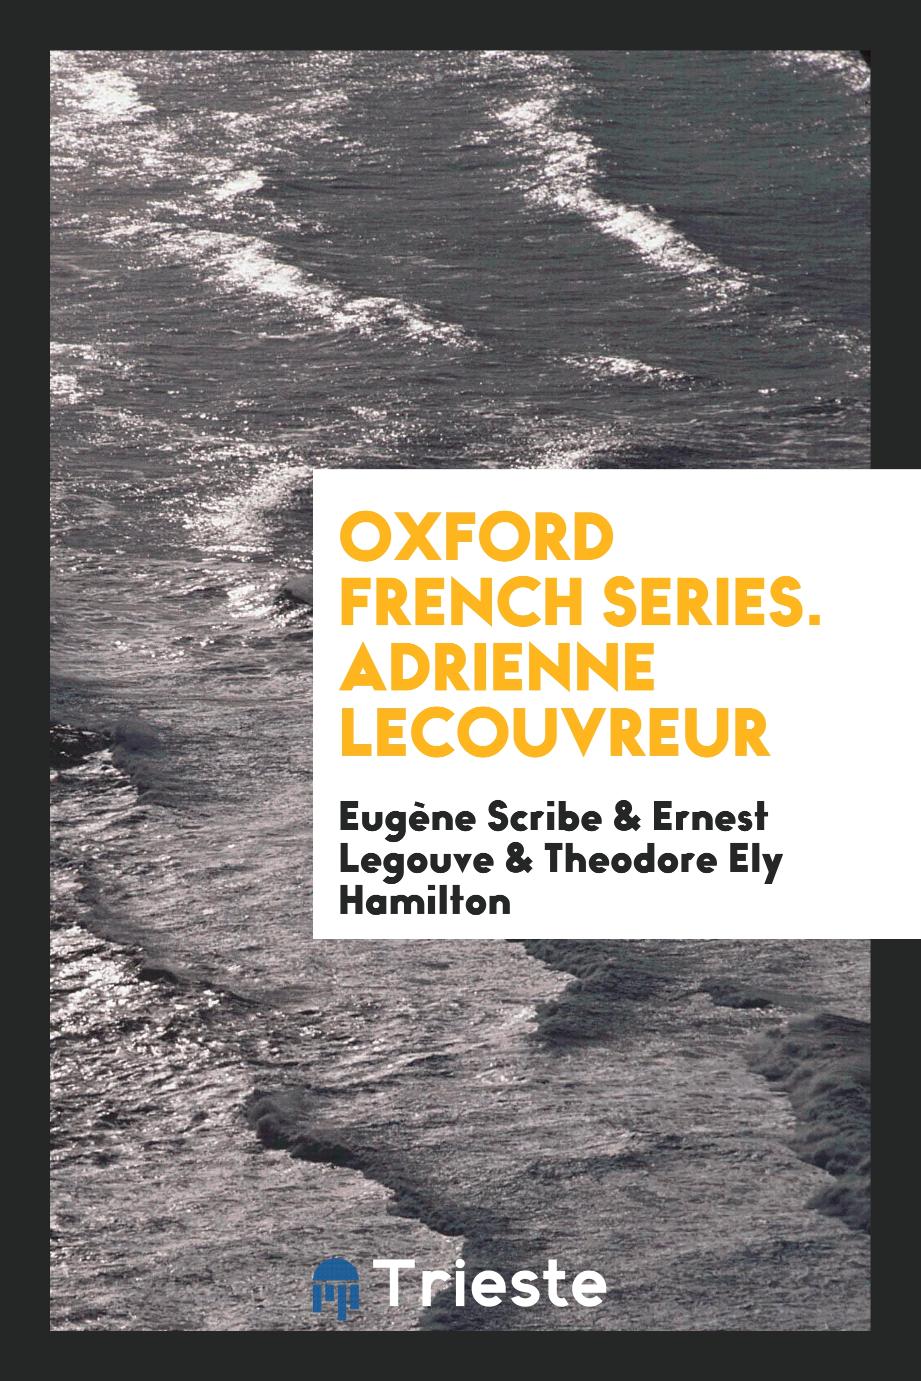 Oxford French Series. Adrienne Lecouvreur